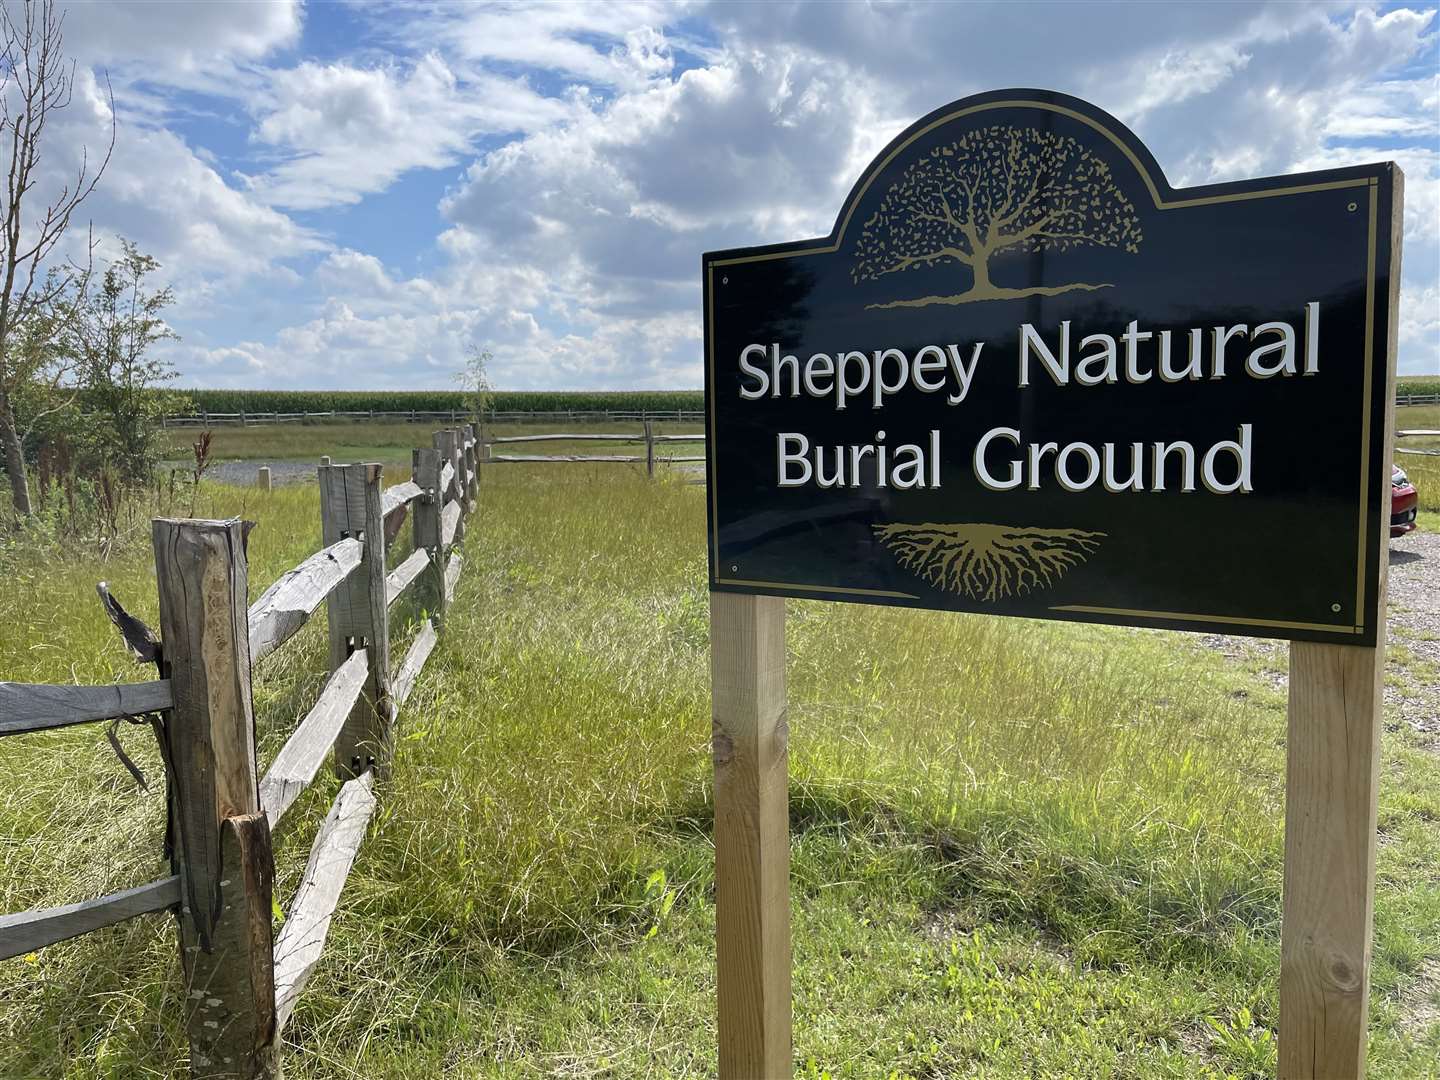 The Sheppey Natural Burial Ground at Harty is now open for services since the site was first identified in 2017